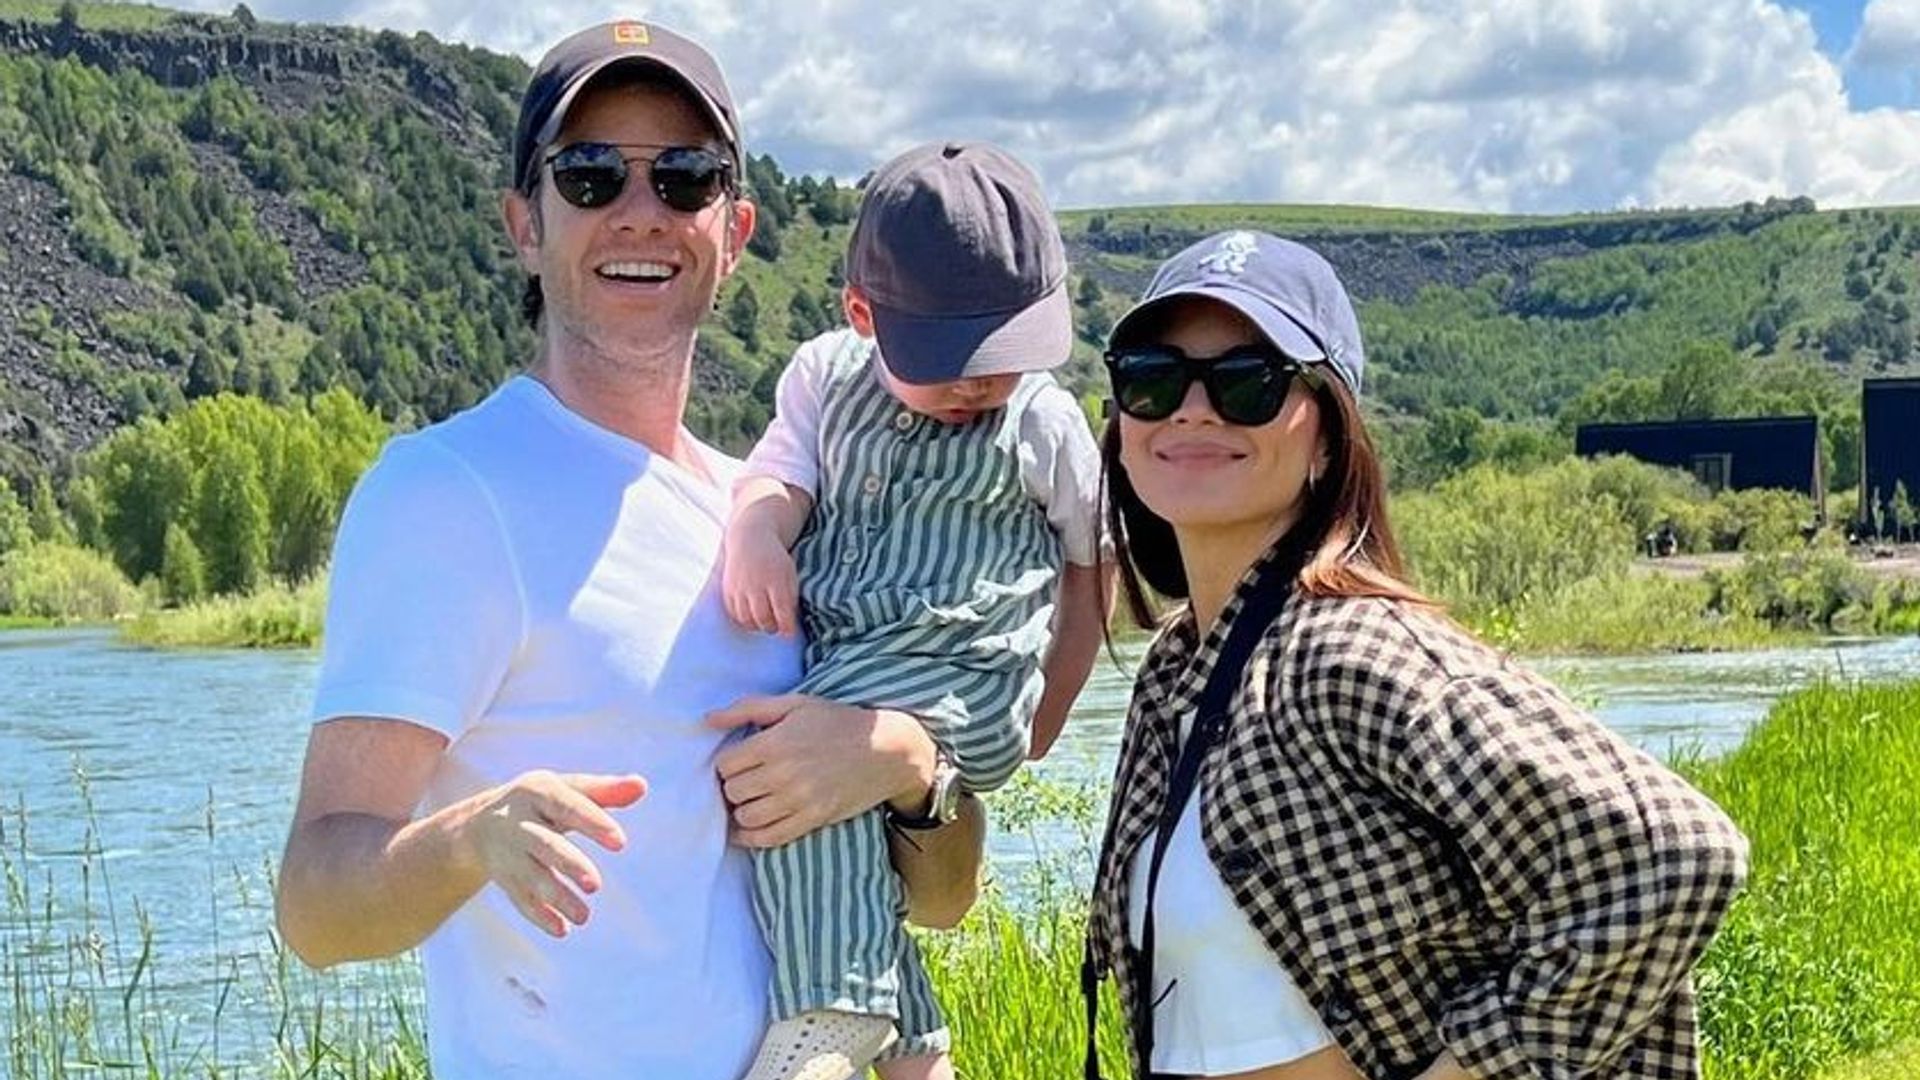 Olivia Munn and John Mulaney smiling in a field near a river with their son Malcolm in John's arms